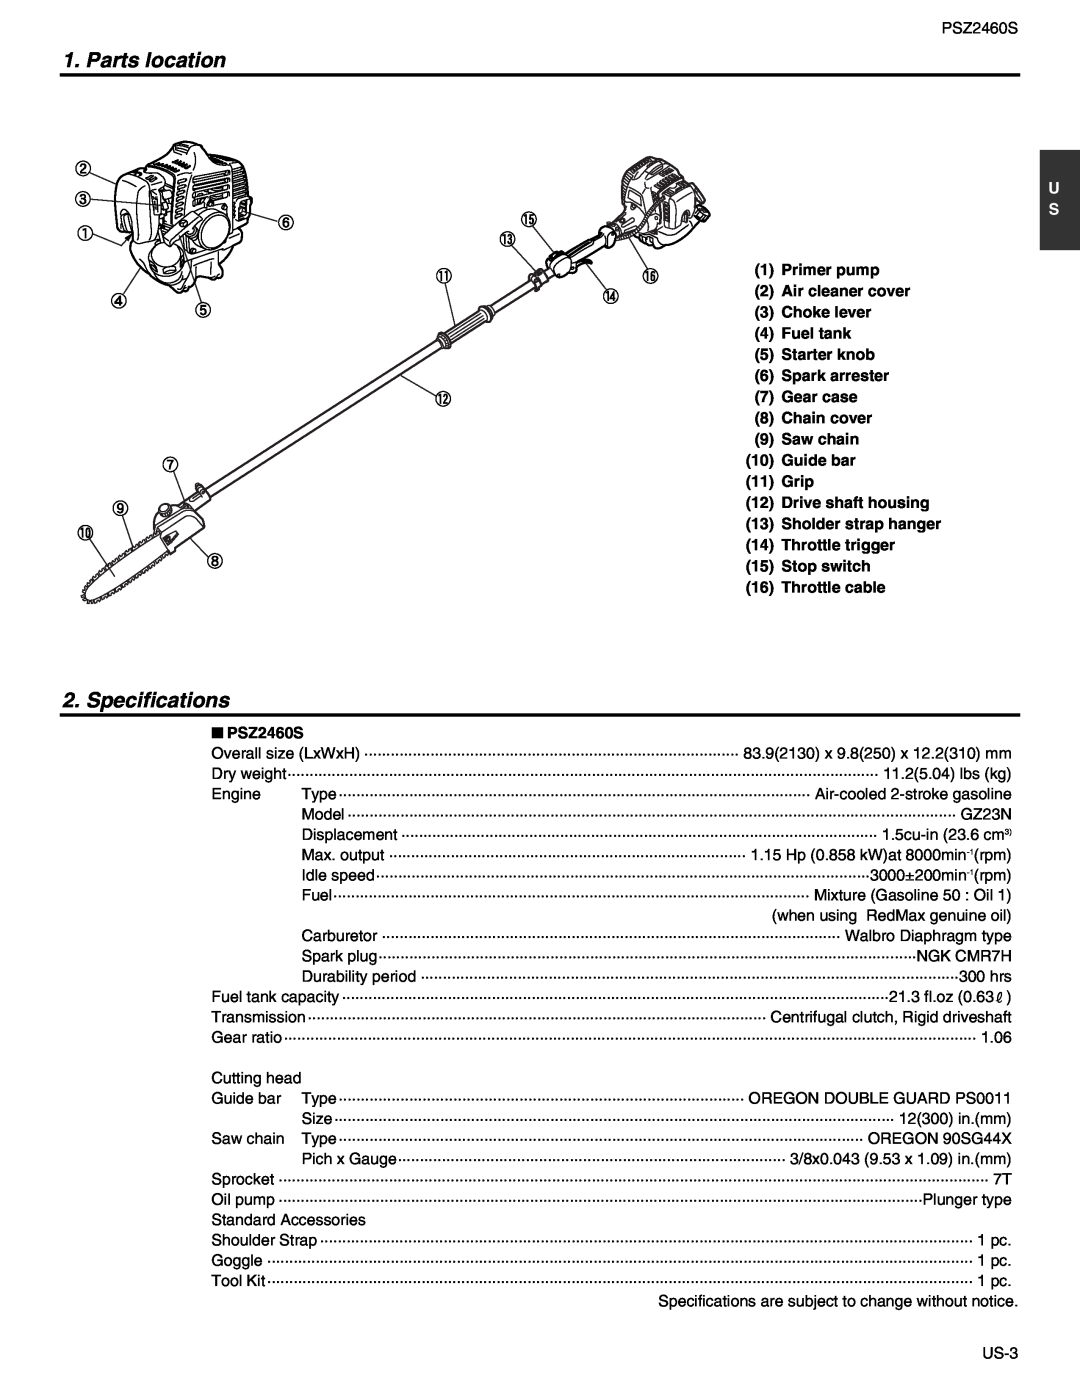 RedMax PSZ2460S manual Parts location, Specifications 